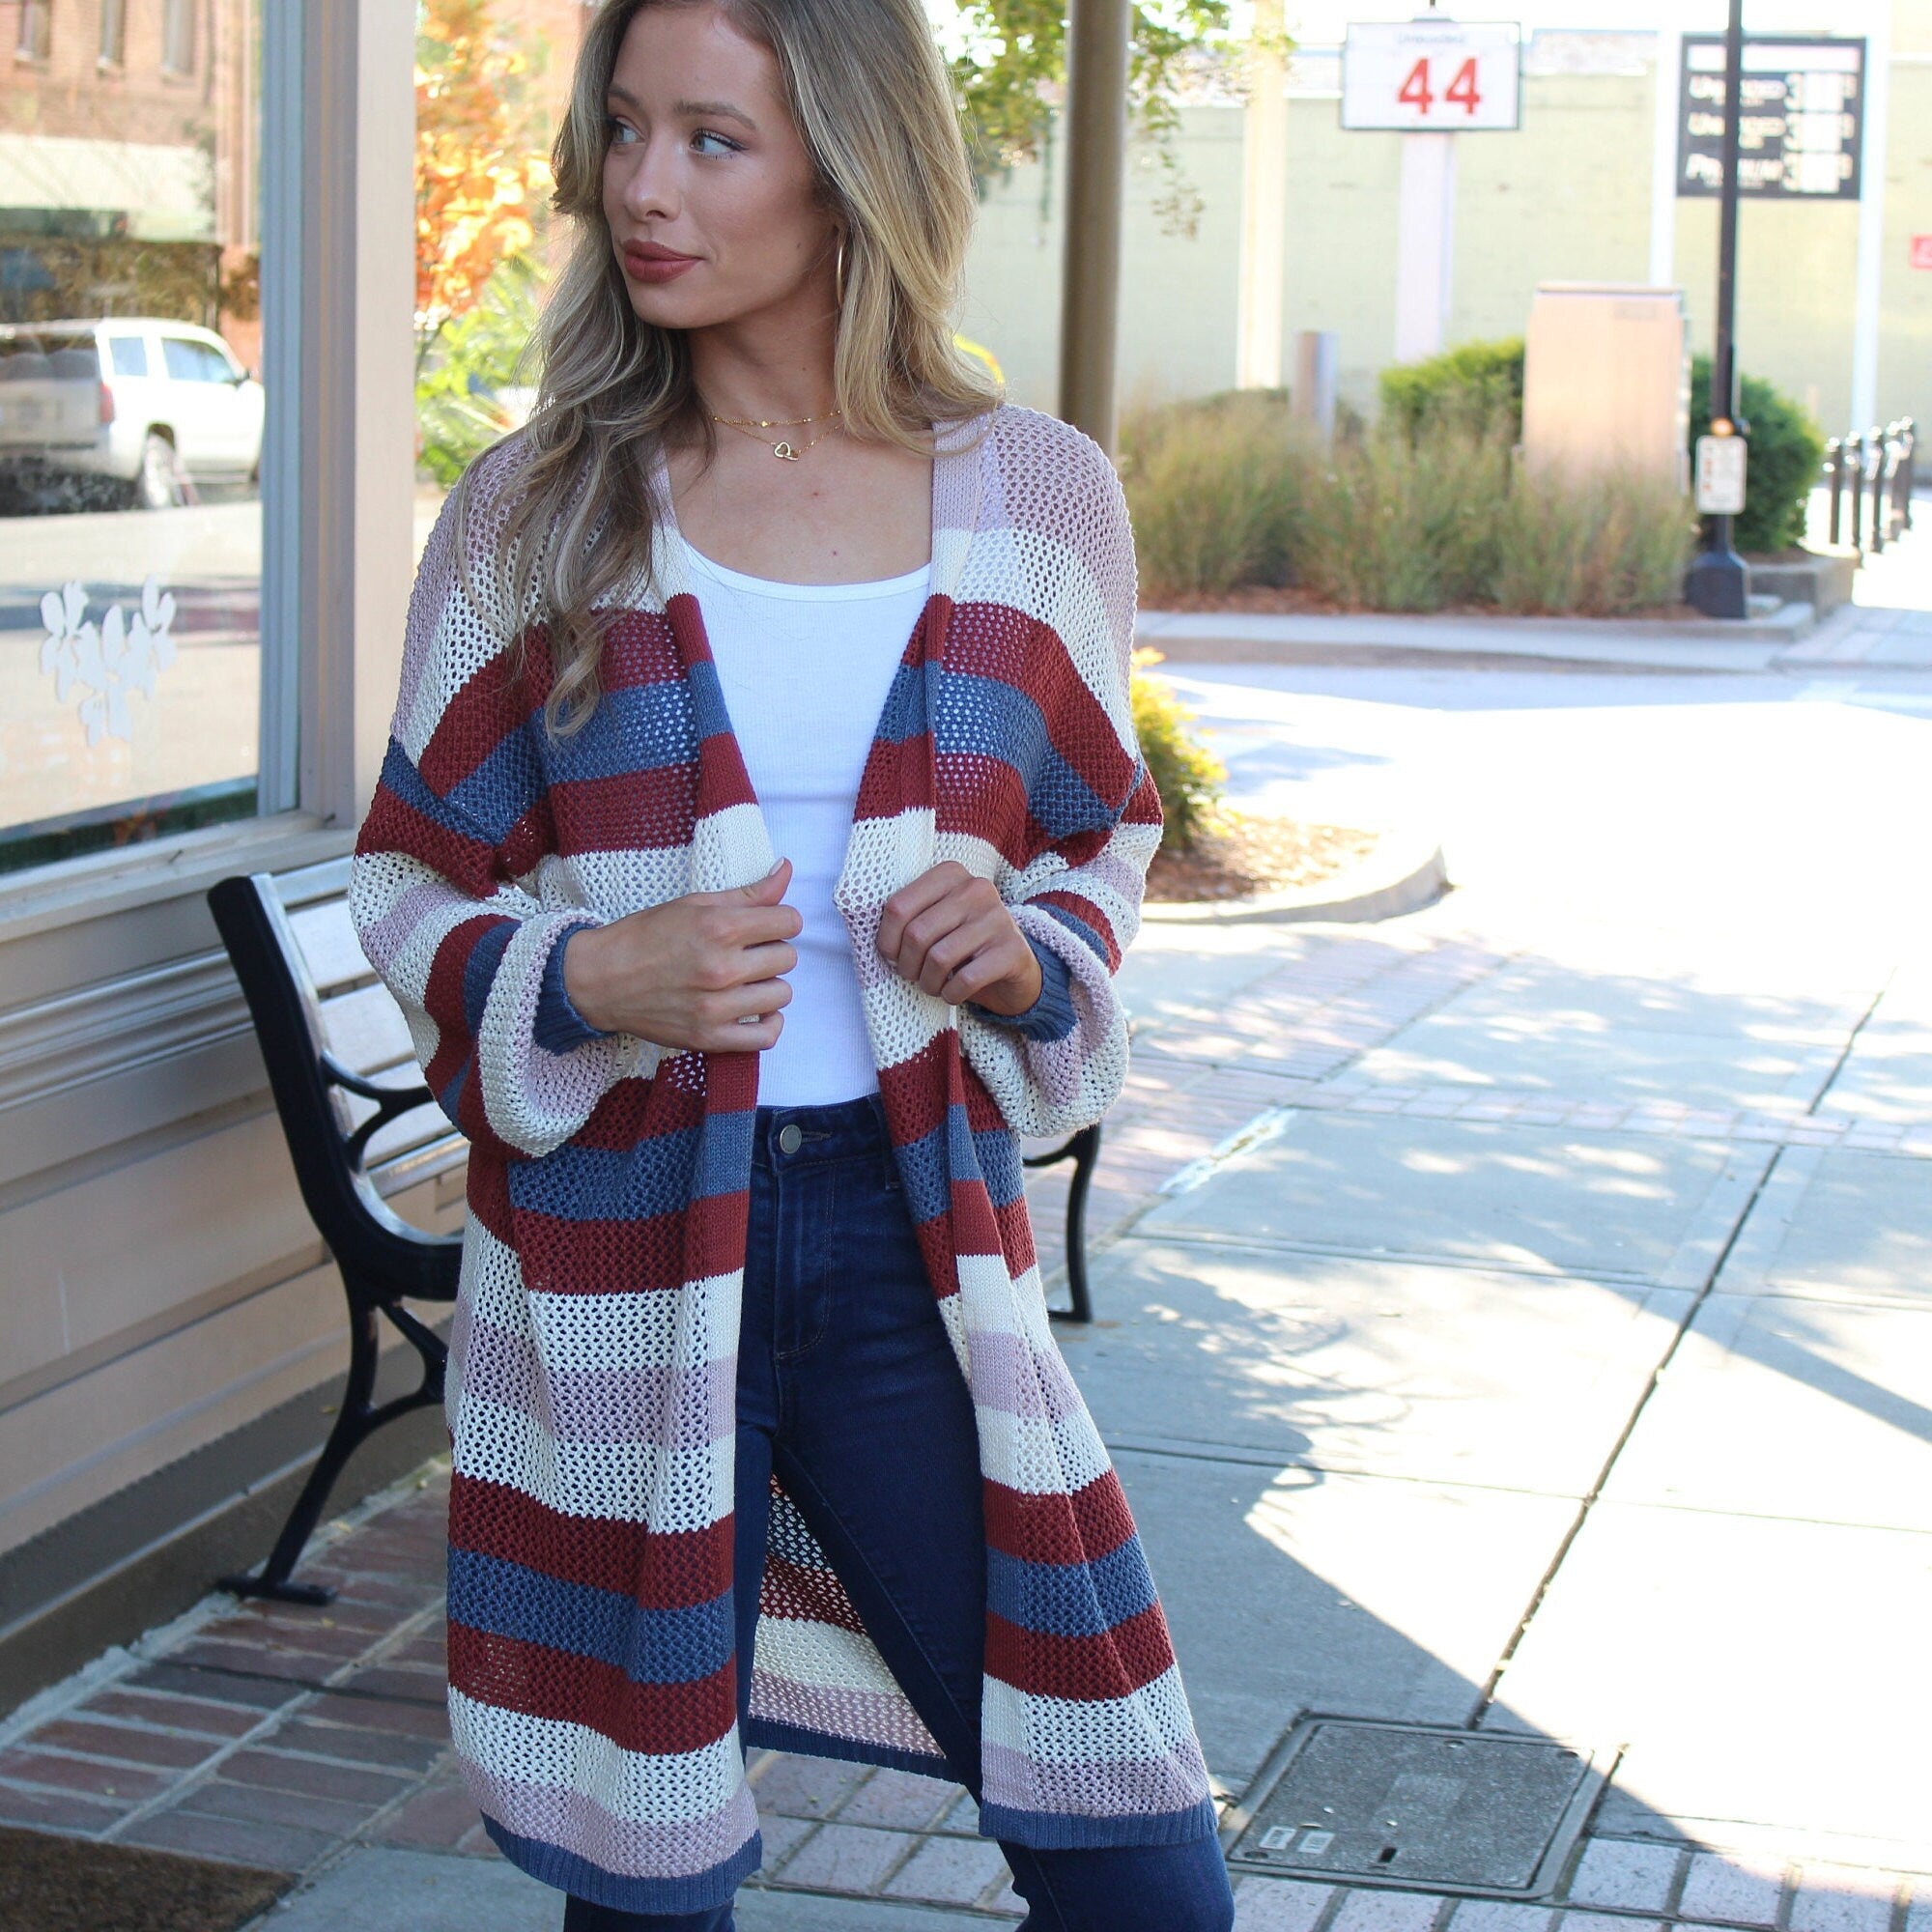 Long Cardigan Sweater - Stripped Knit Open Front  Sweater- Ribbed Fall Sweater- Cardigan Duster - Winter and Fall Cardigan Sweater